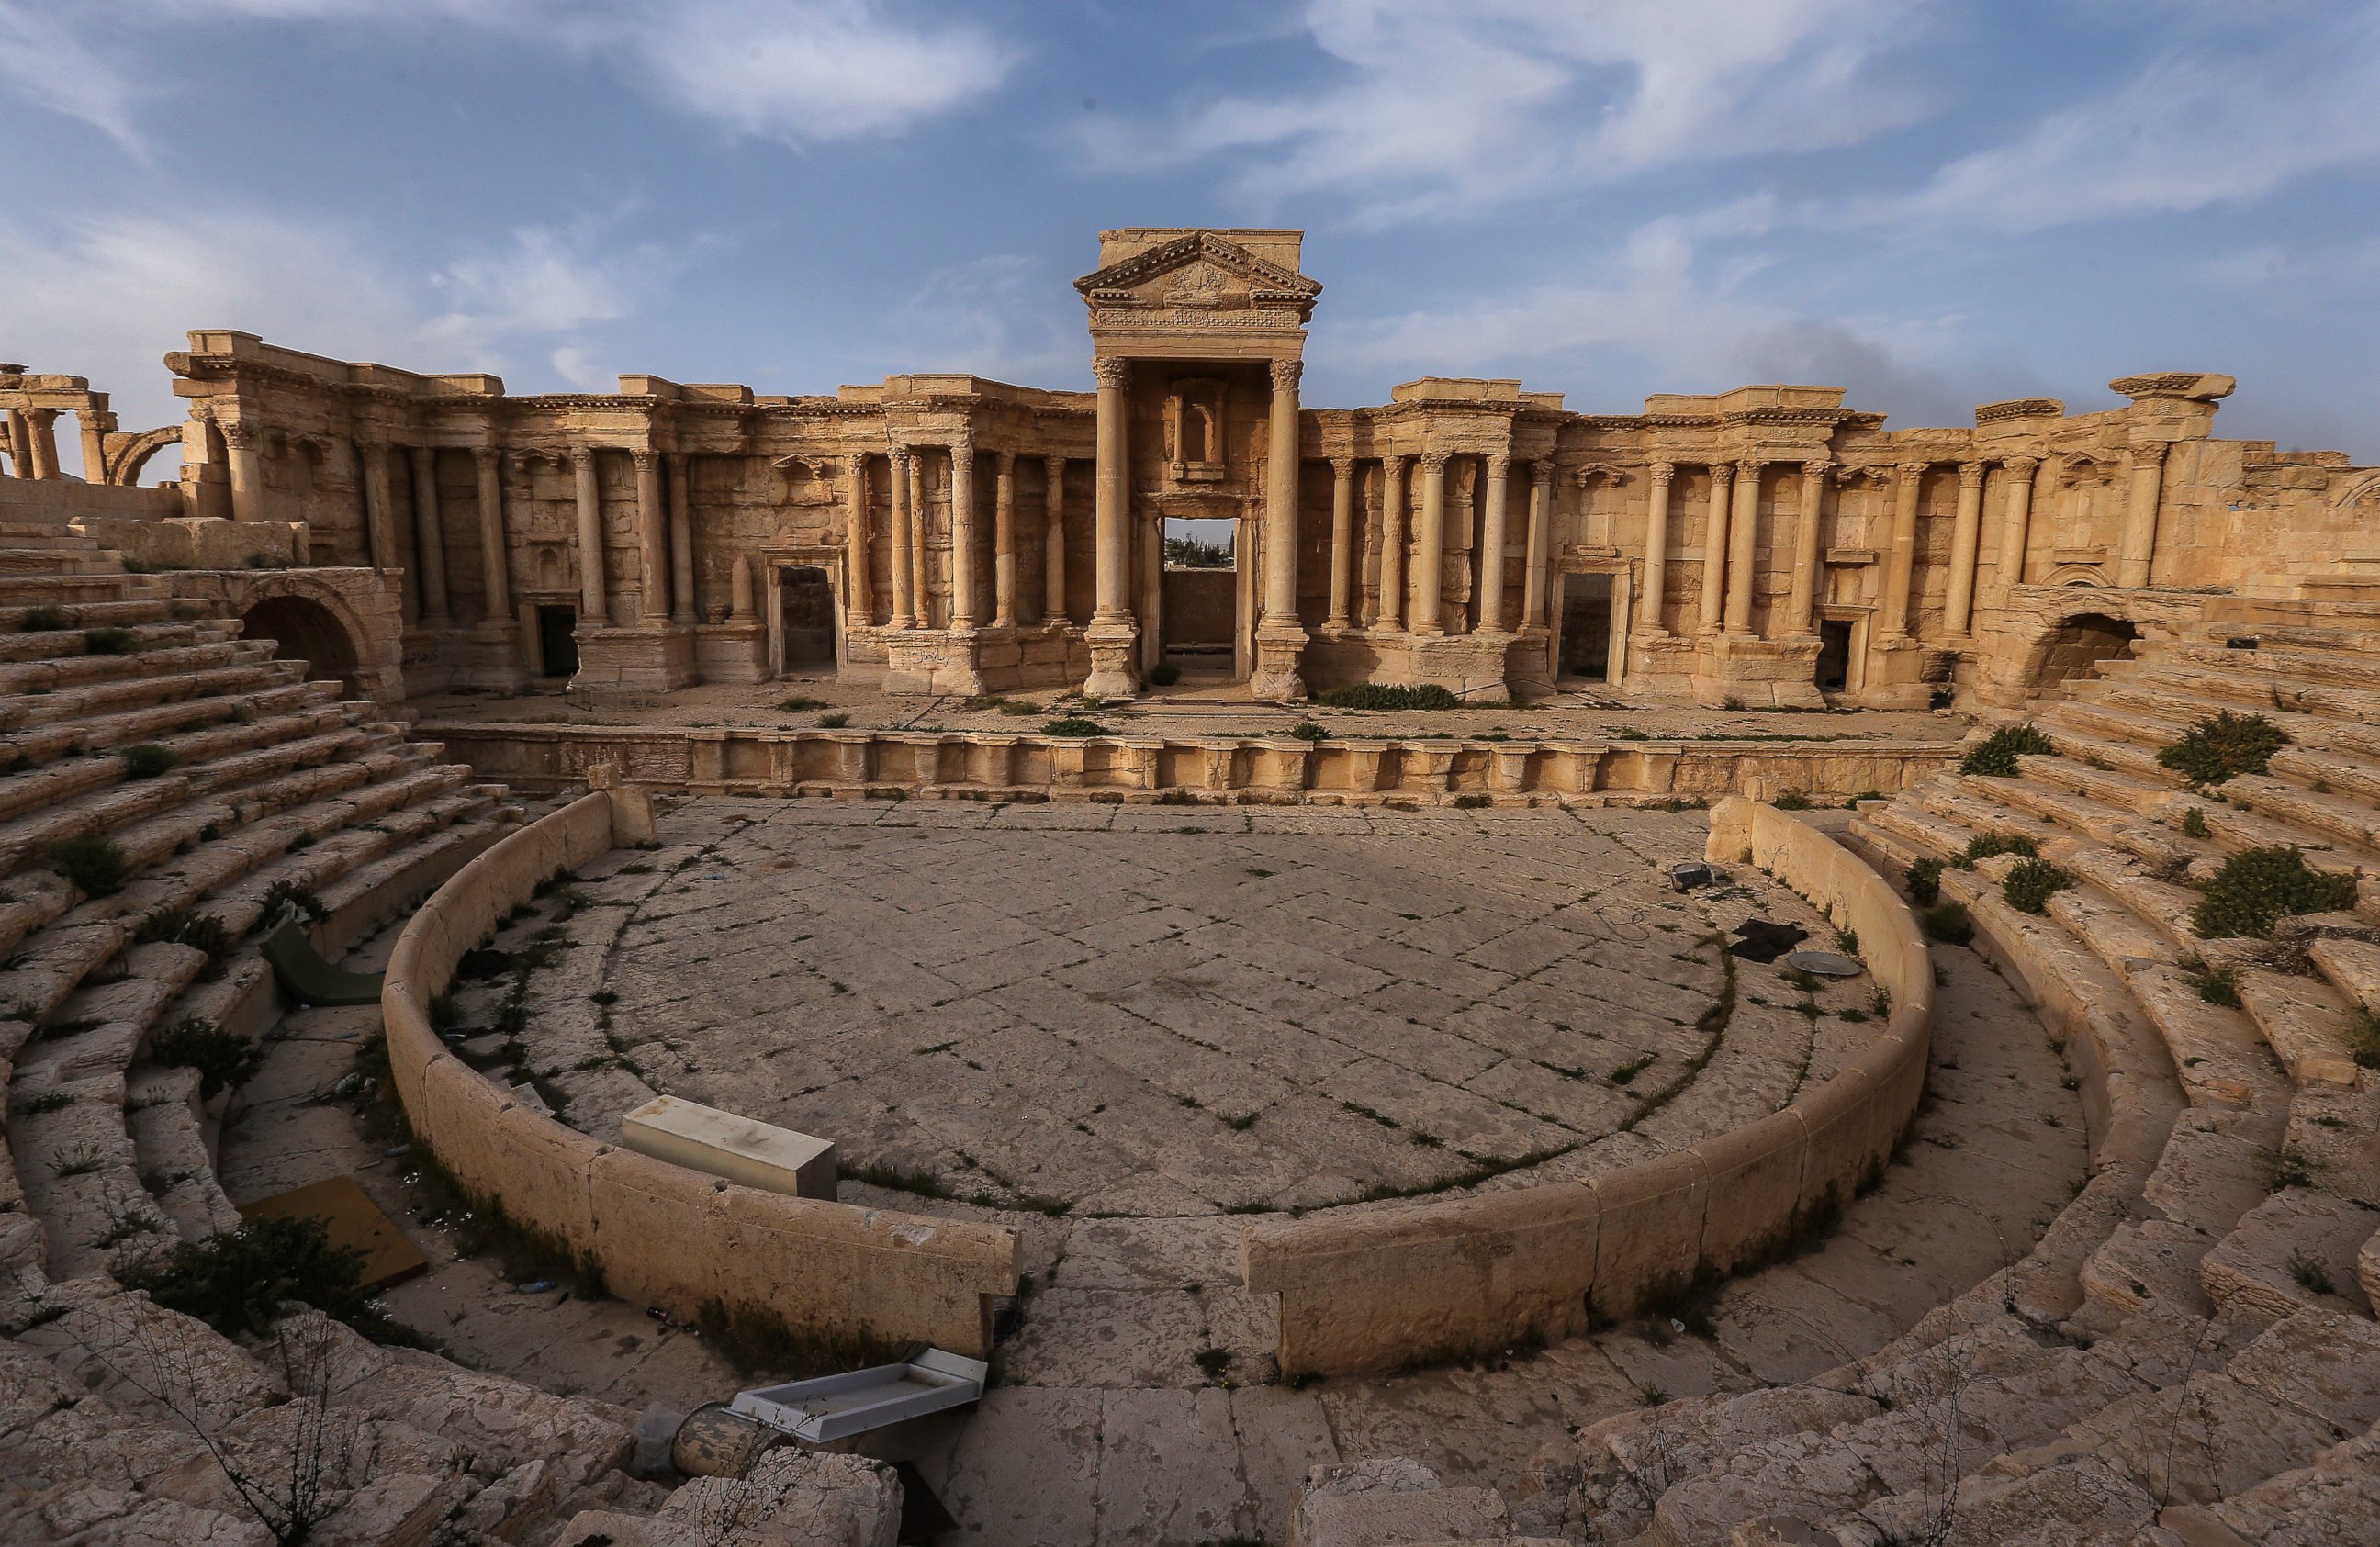 PHOTO: A view of the Roman Theatre in the ancient city of Palmyra, a UNESCO world heritage site, is seen here where the Islamic State (ISIS) staged executions.